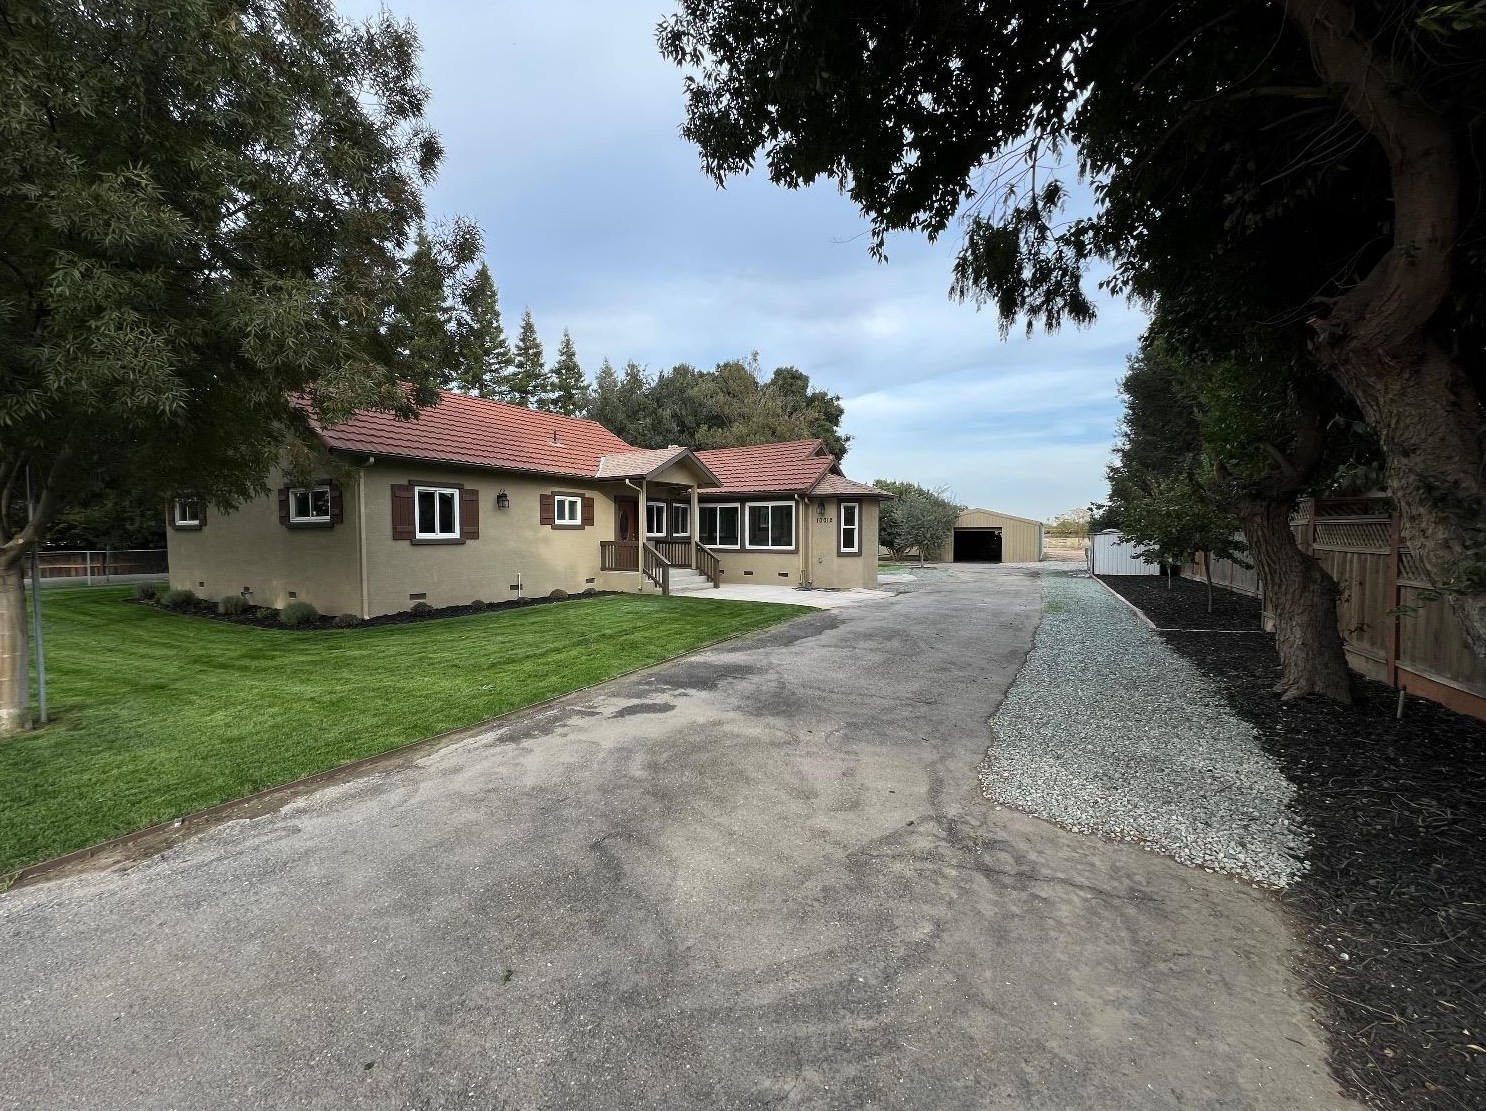 10016 S Priest Rd, French Camp, CA 95231